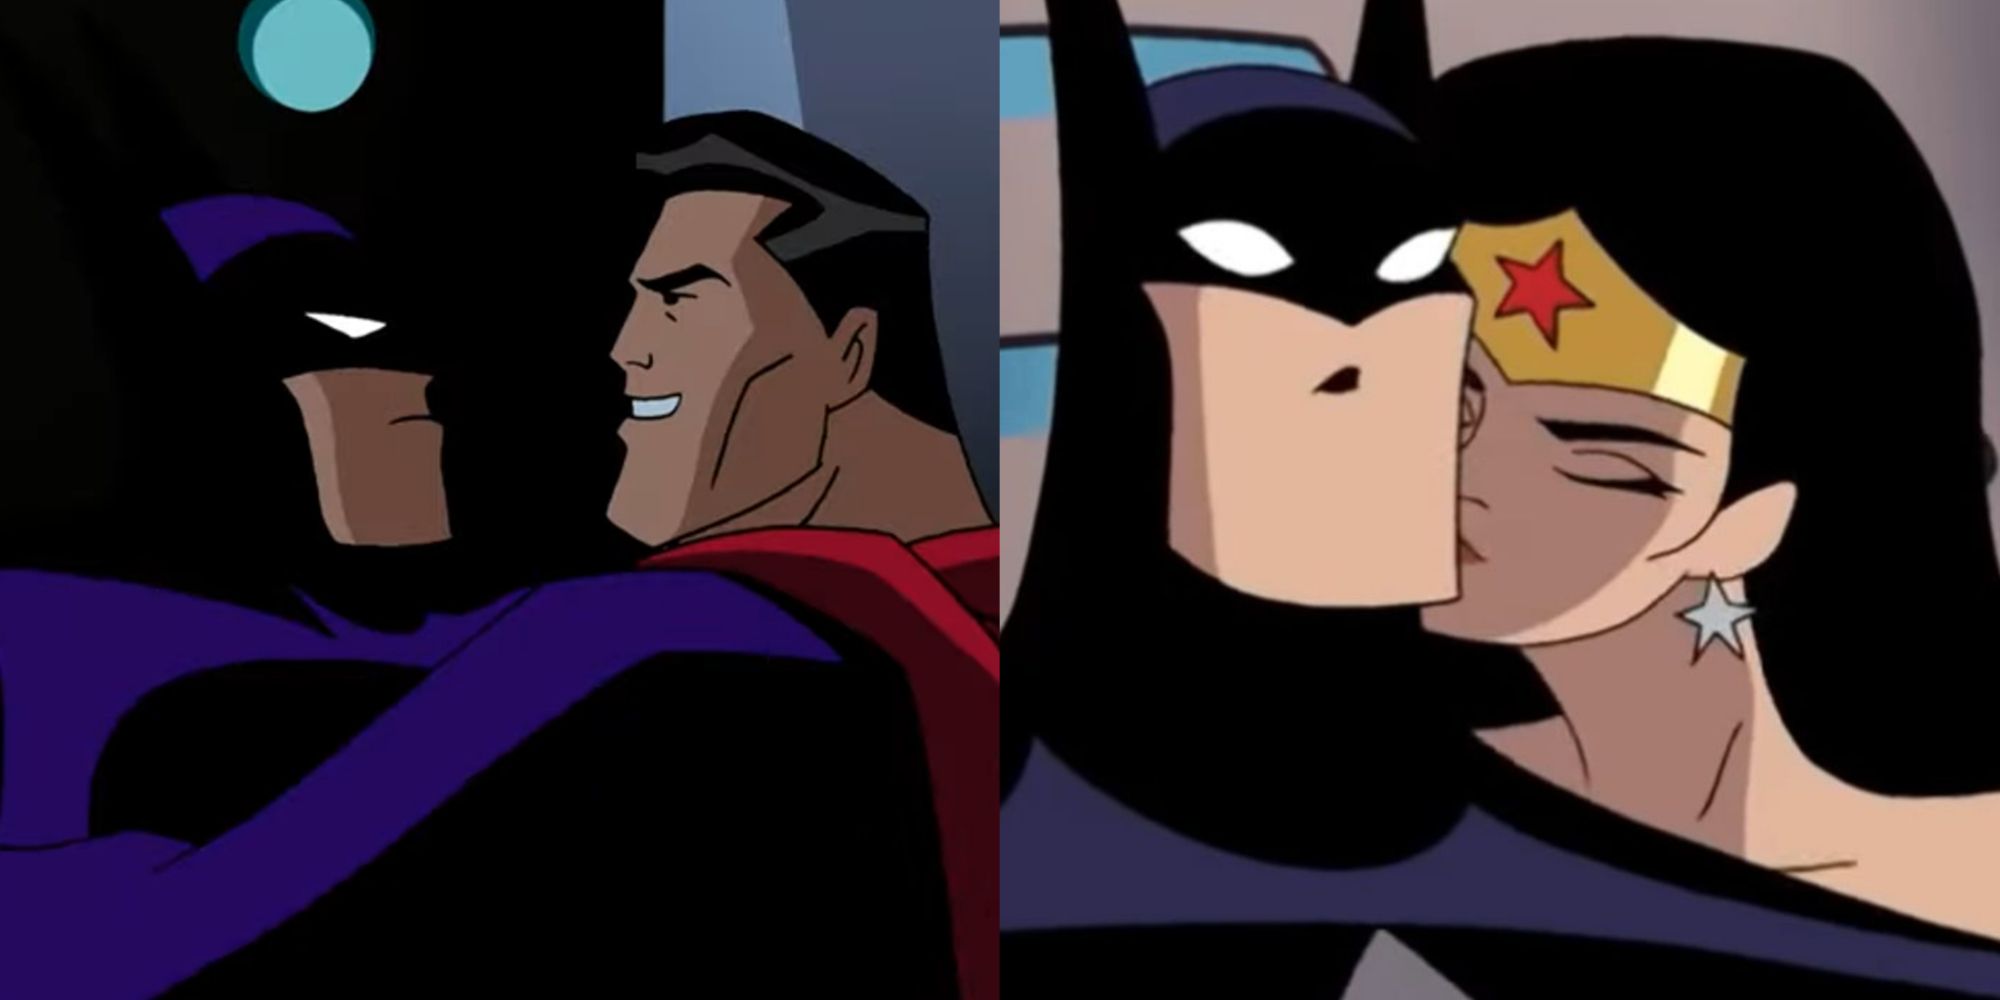 Batman's 10 Best Friendships In The DCAU, Ranked By Story Impact